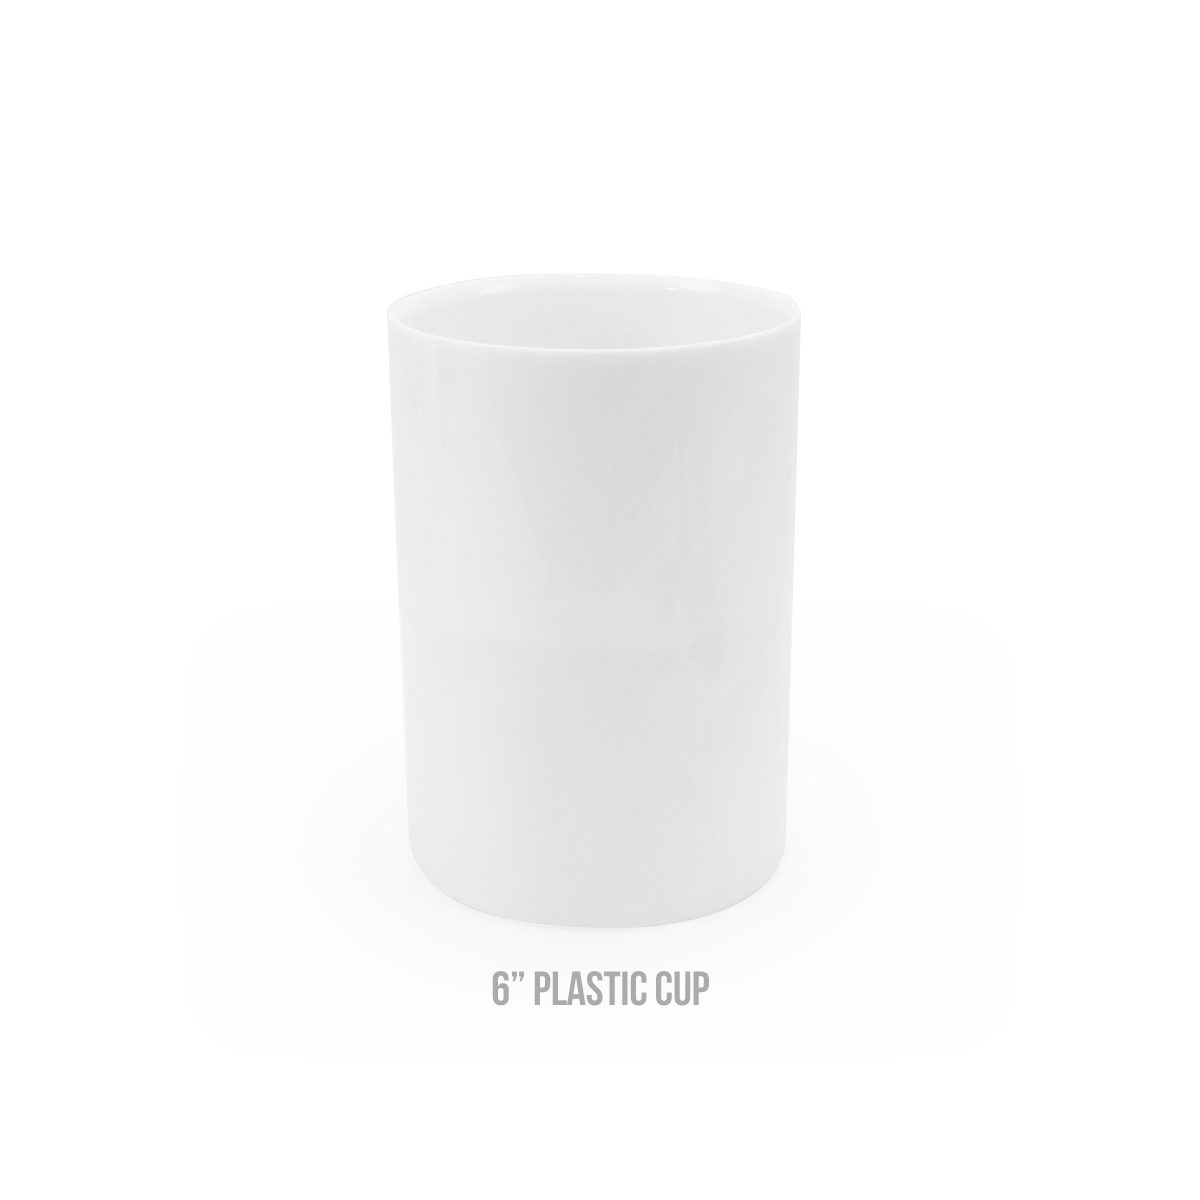 6 inch plastic cup